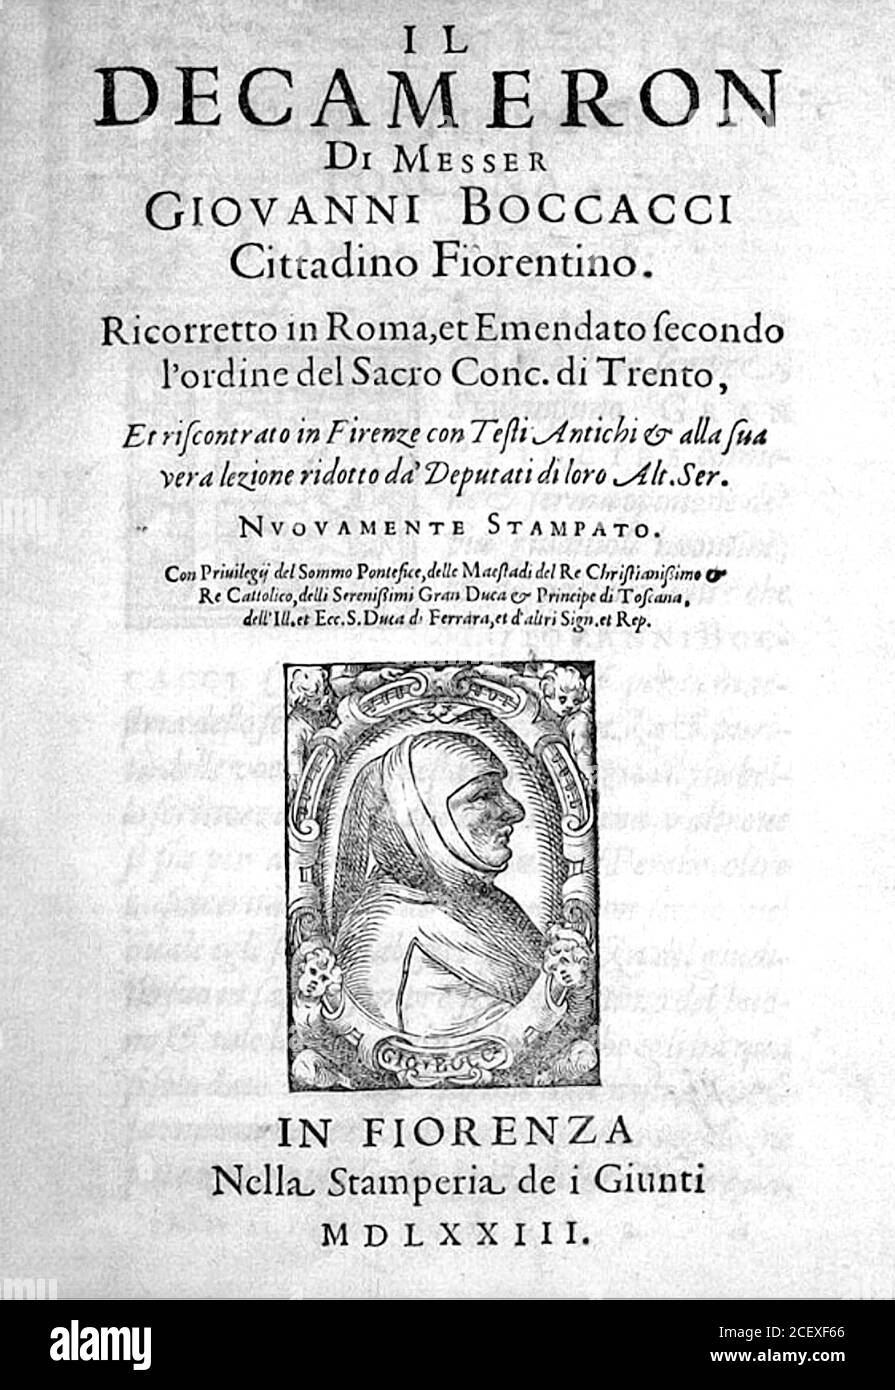 Decameron. Title page of a 1573 edition of The Decameron by Giovanni Boccacci. Stock Photo